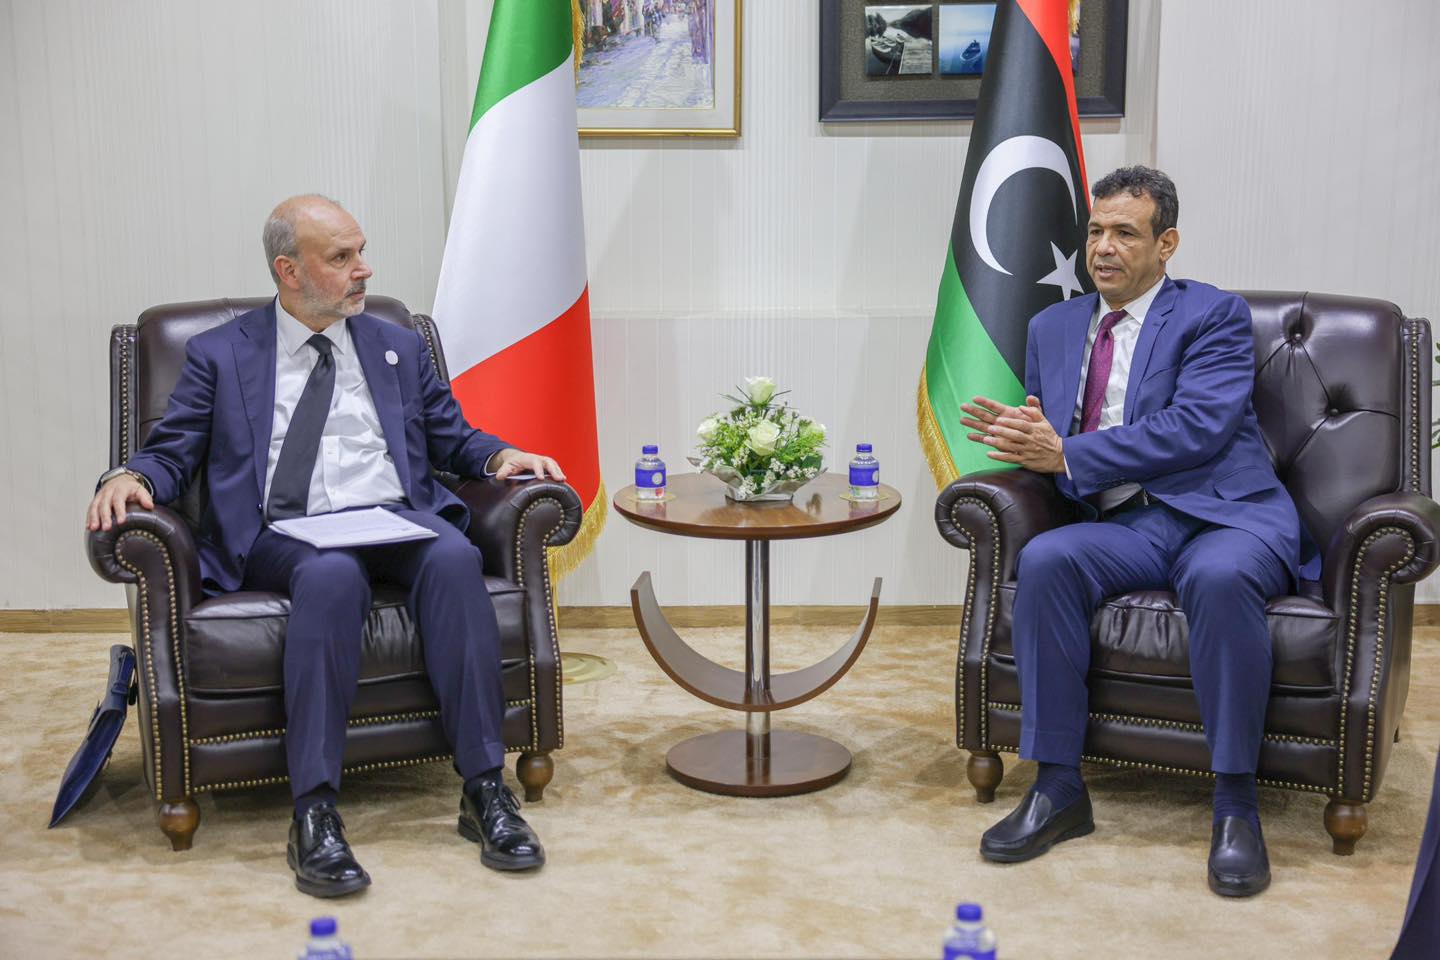 Abu-Janah meets with the Italian Health Minister.